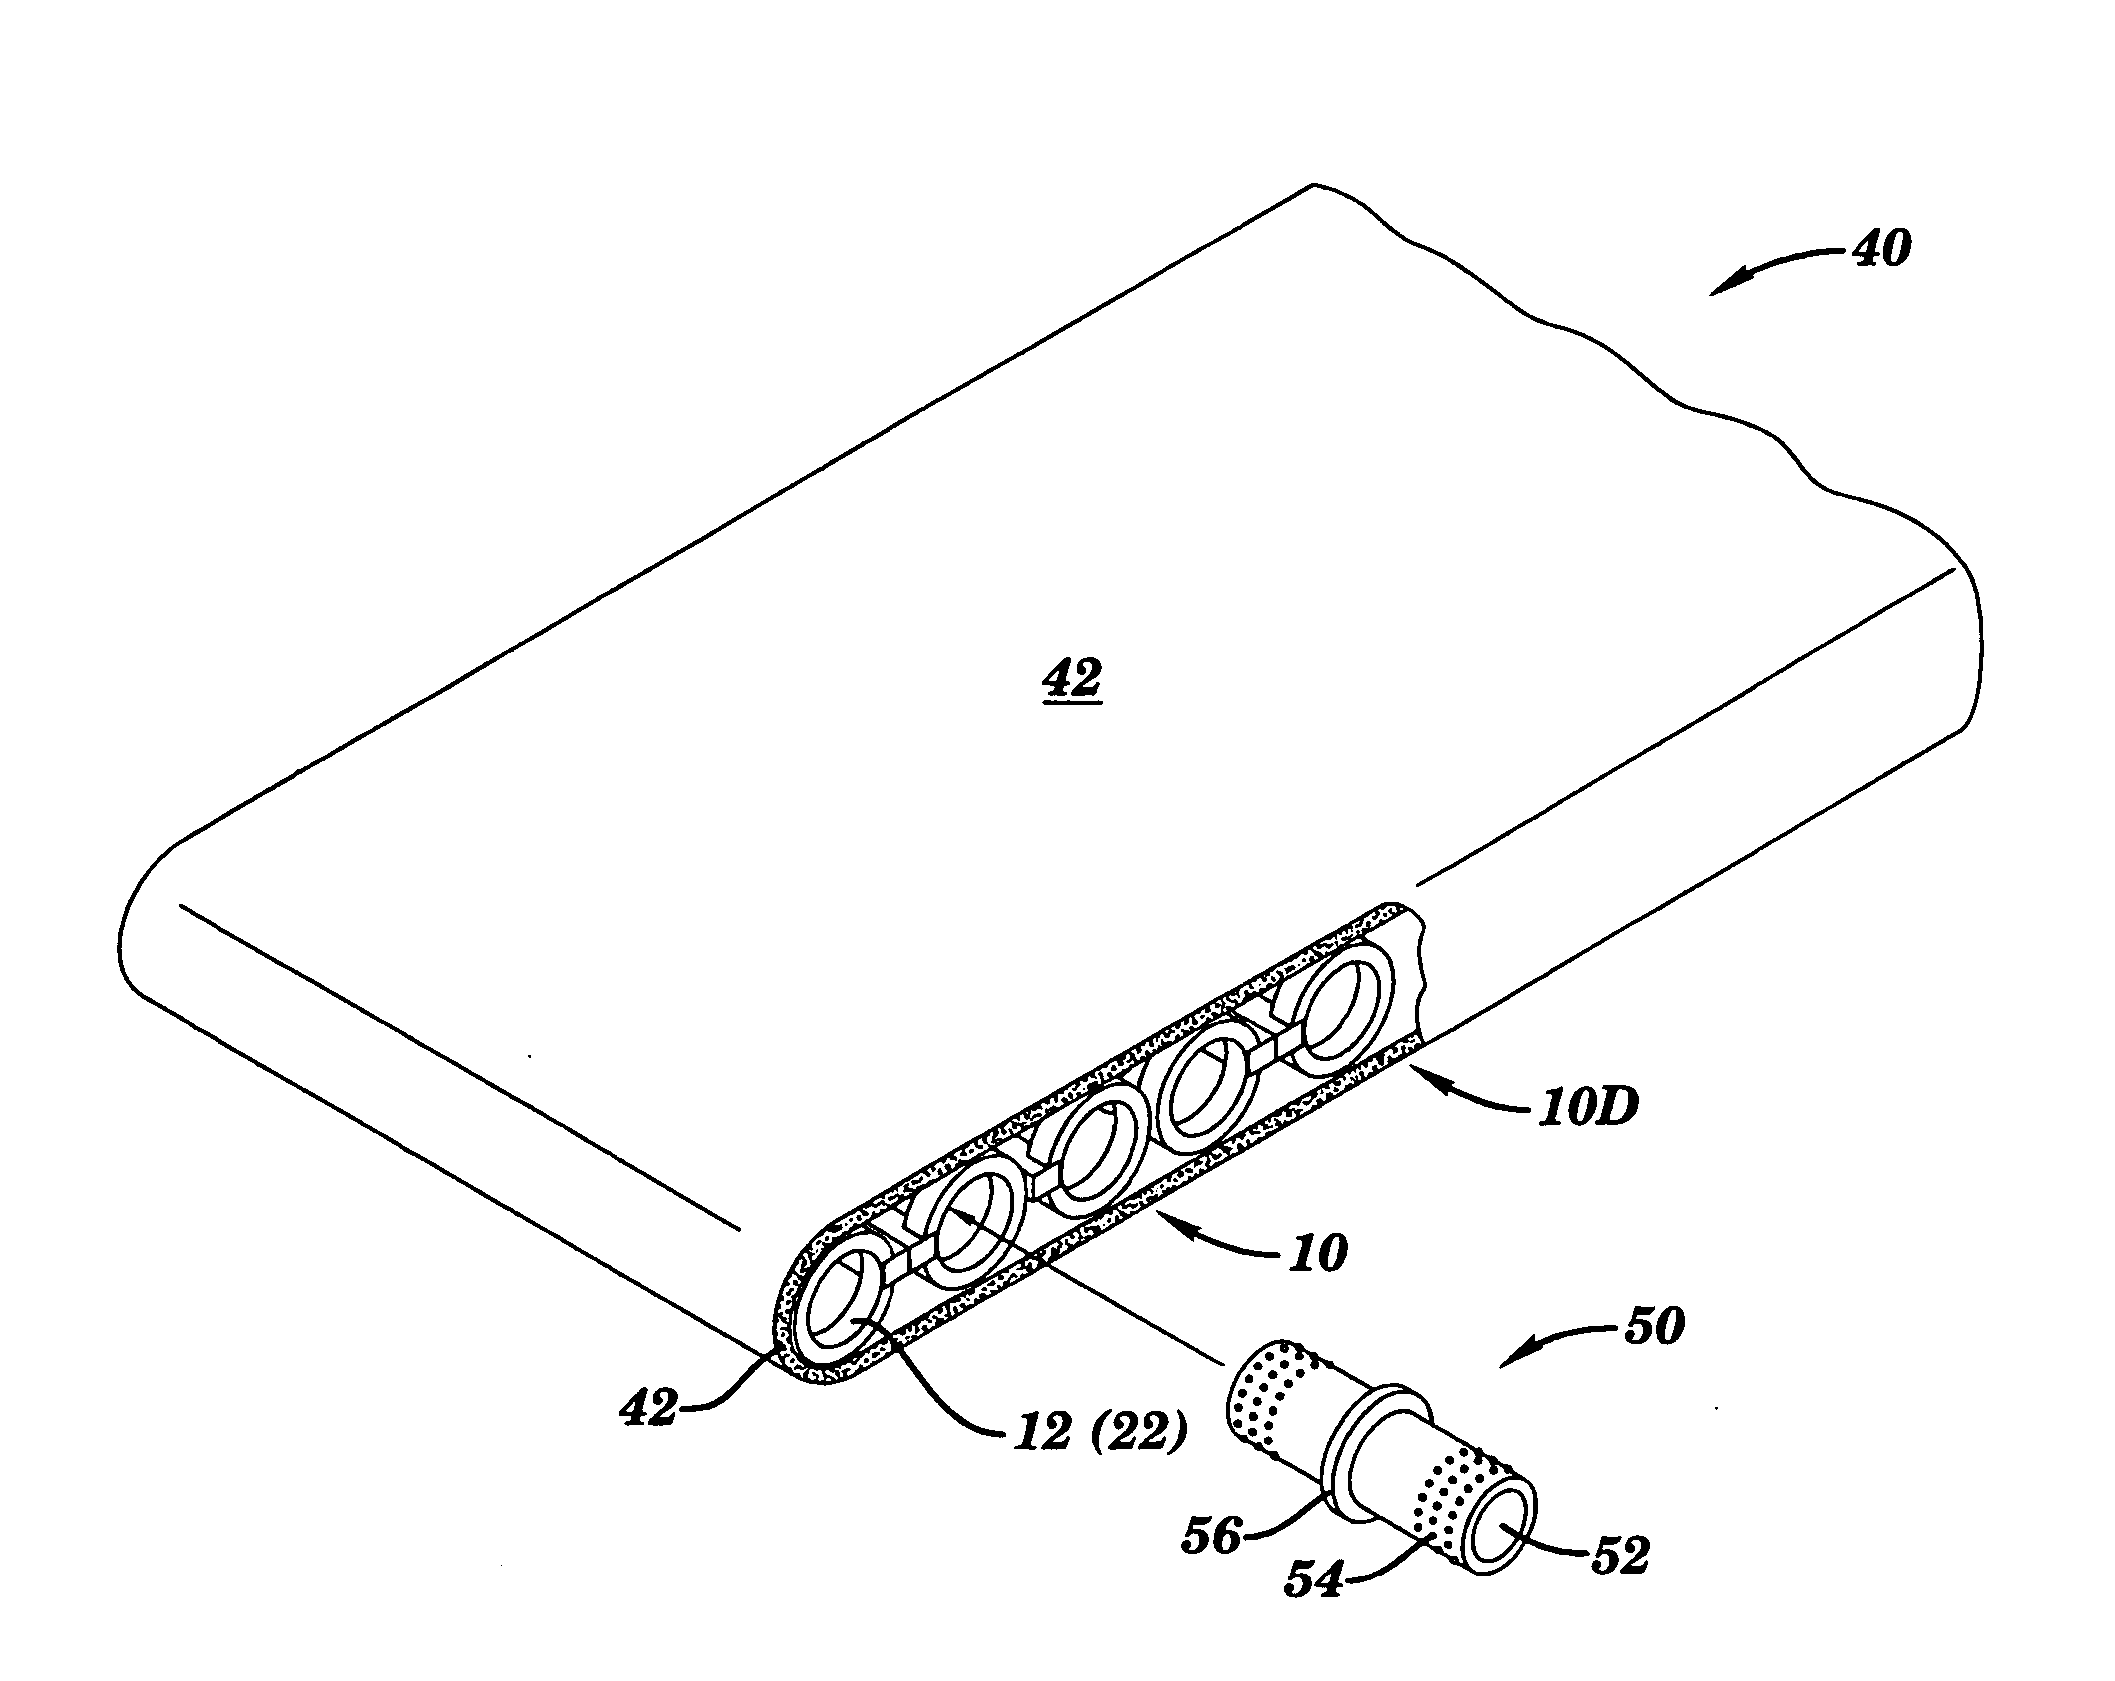 Multi-use fluid collection and transport apparatus